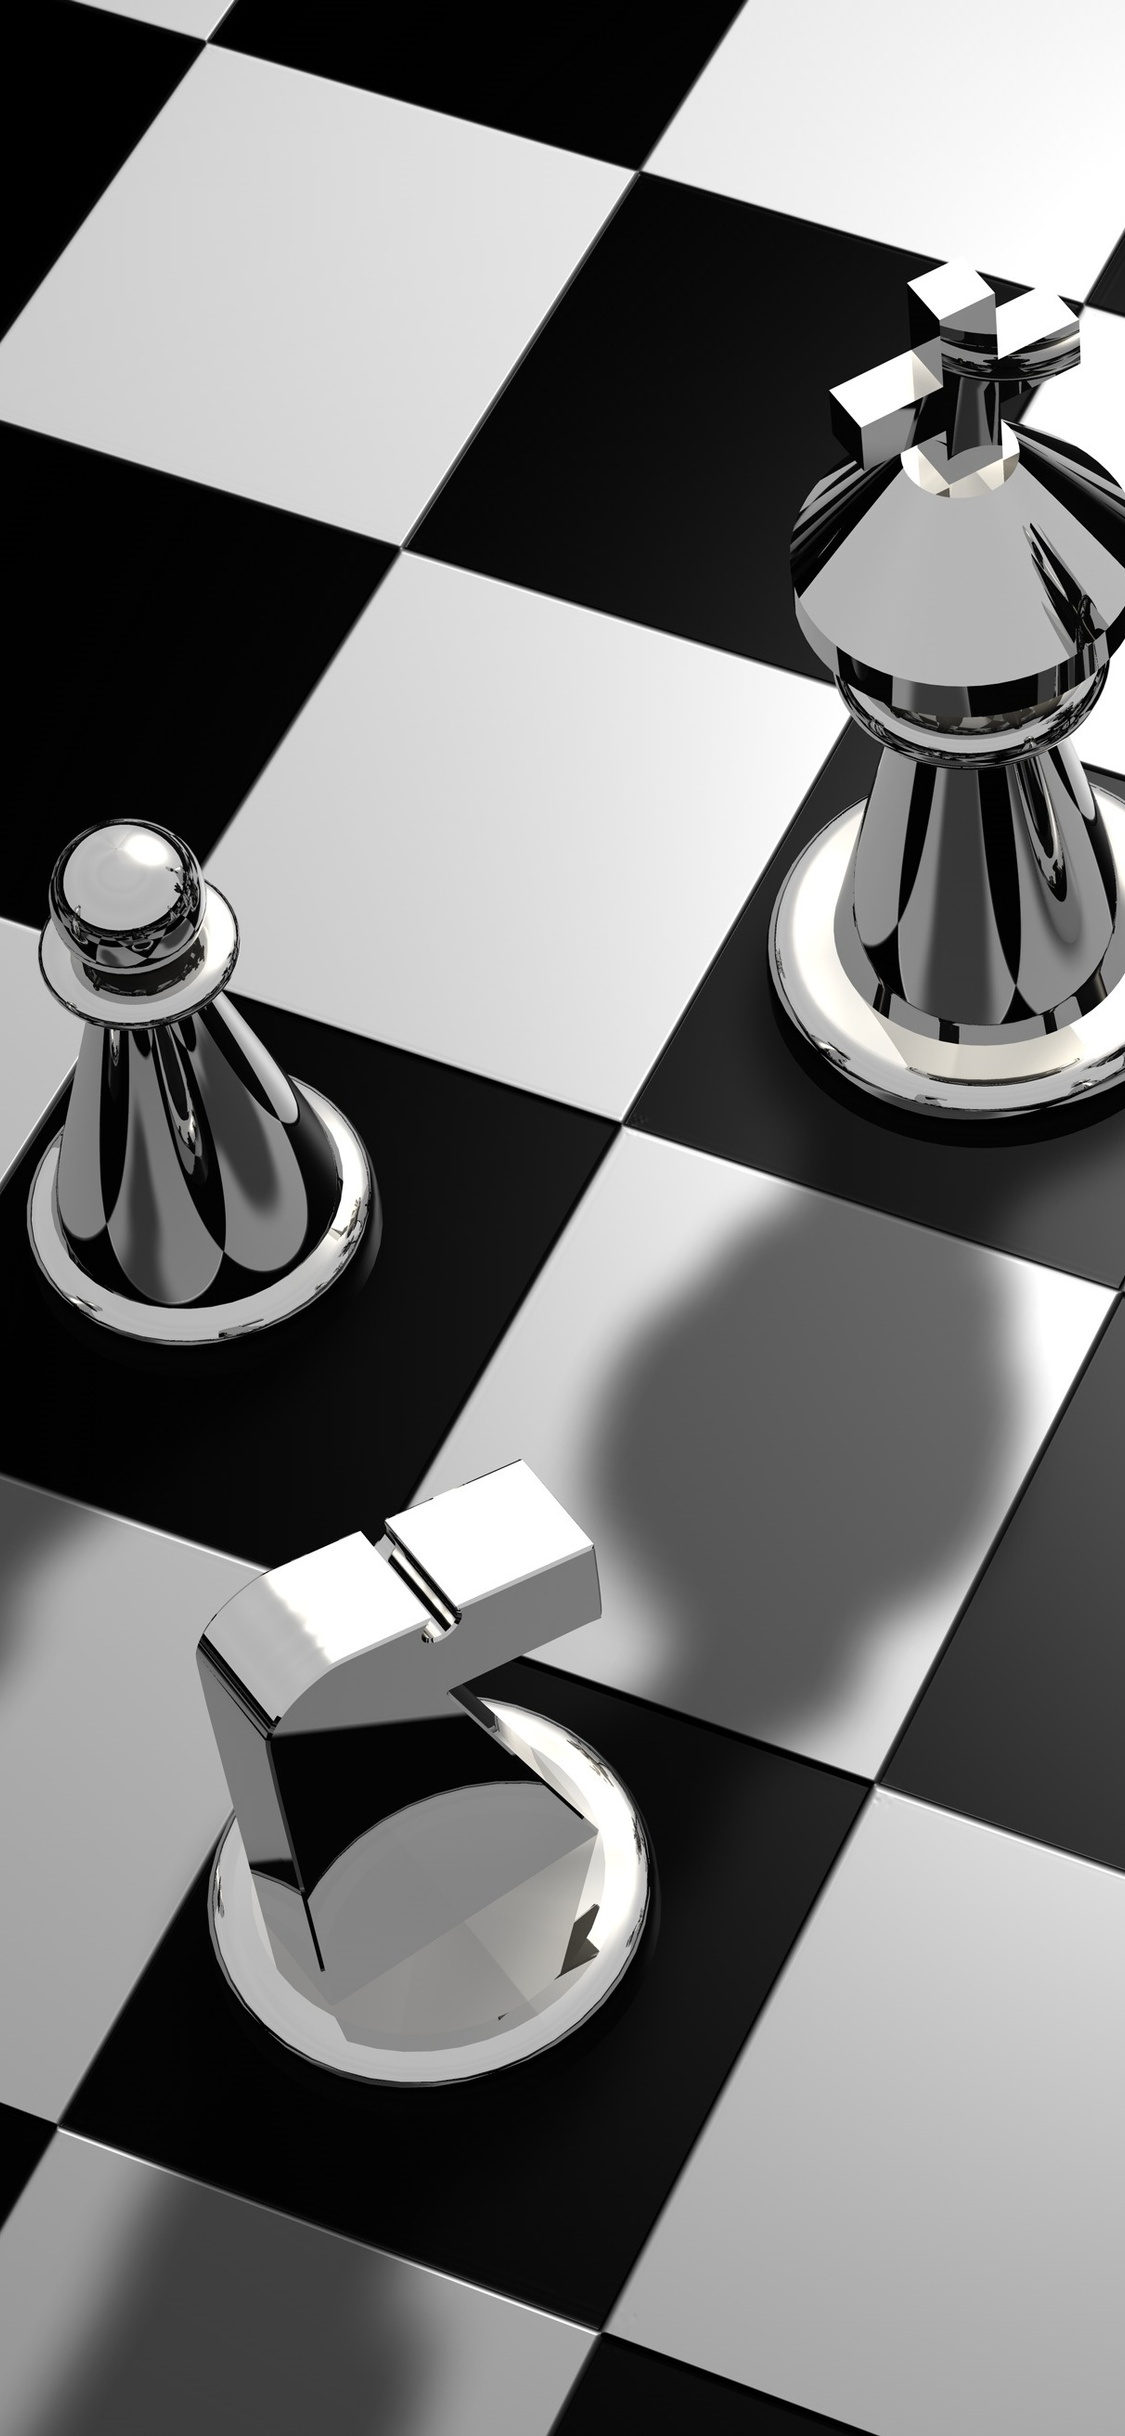 Share 88+ iphone chess wallpaper - in.coedo.com.vn